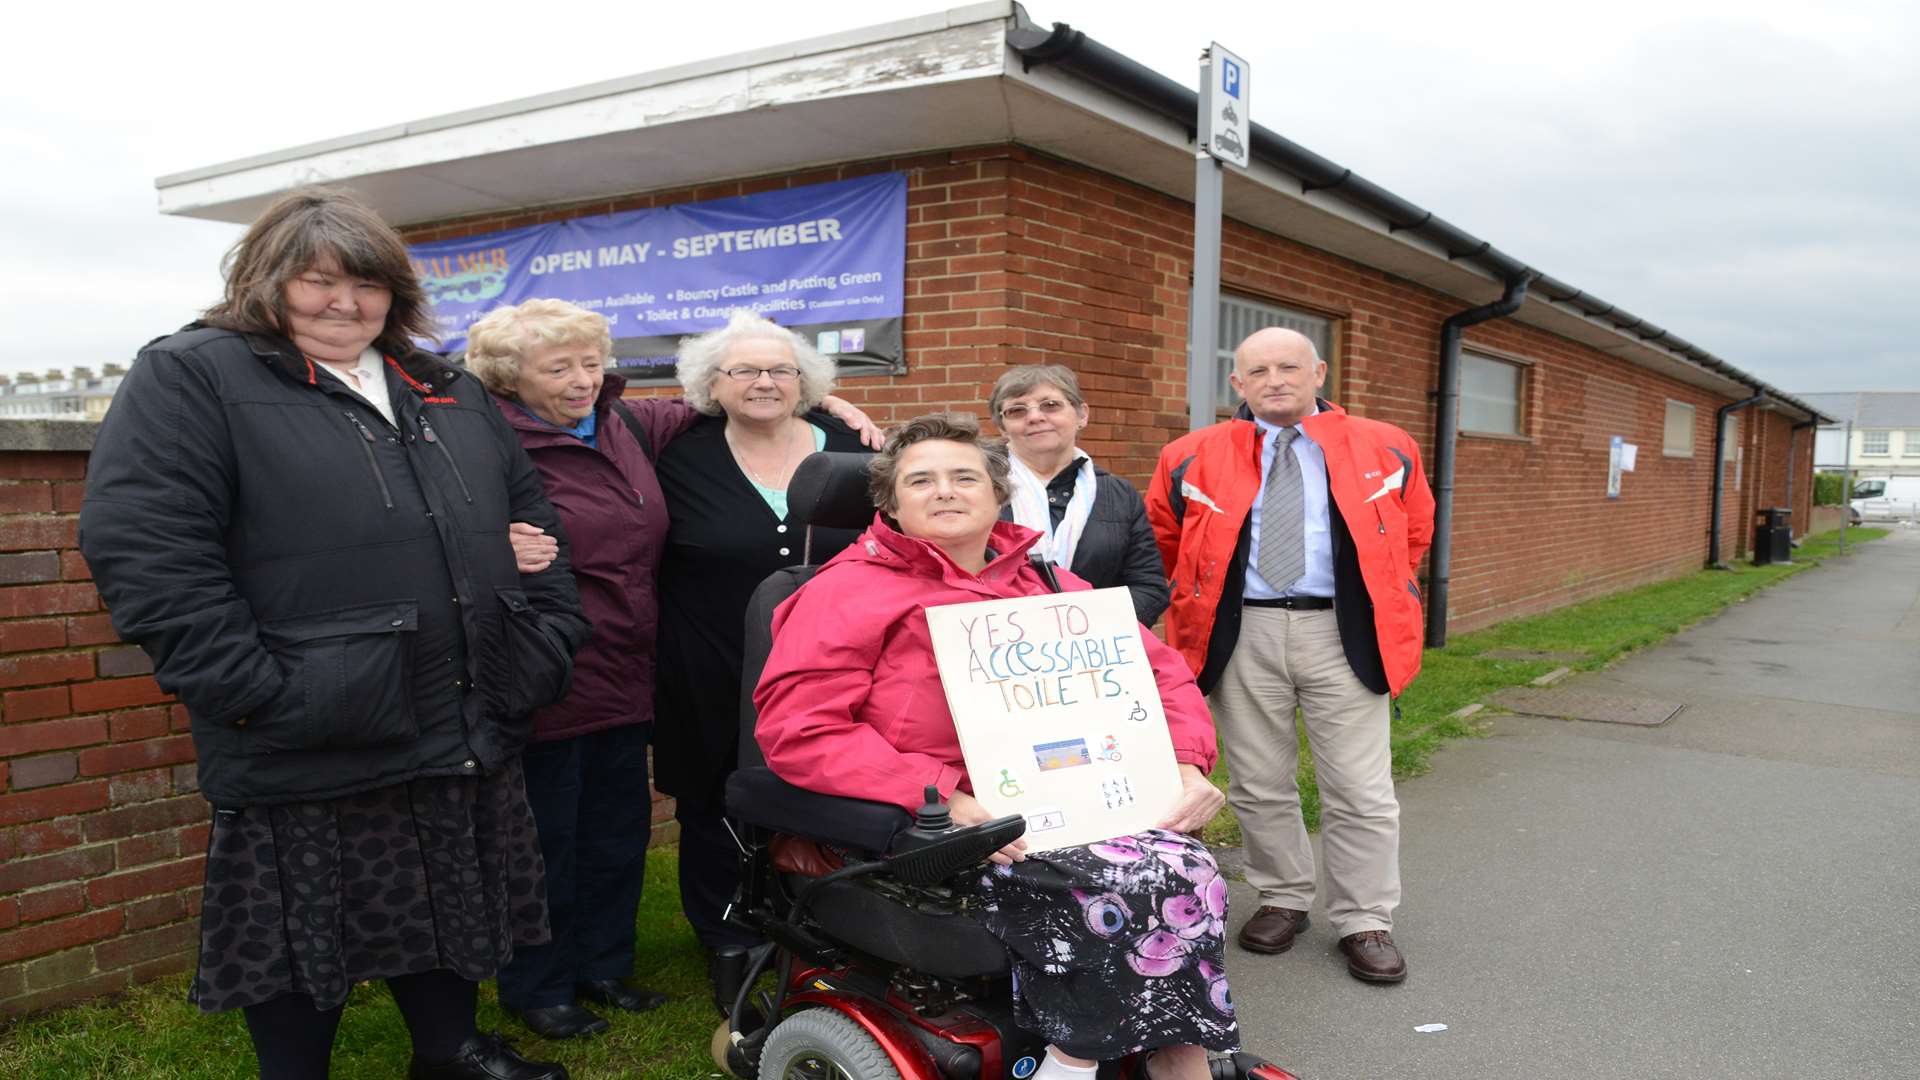 The Deal Speaking Out Group voiced their concerns about the lack of disabled toilet facilities near Walmer Green